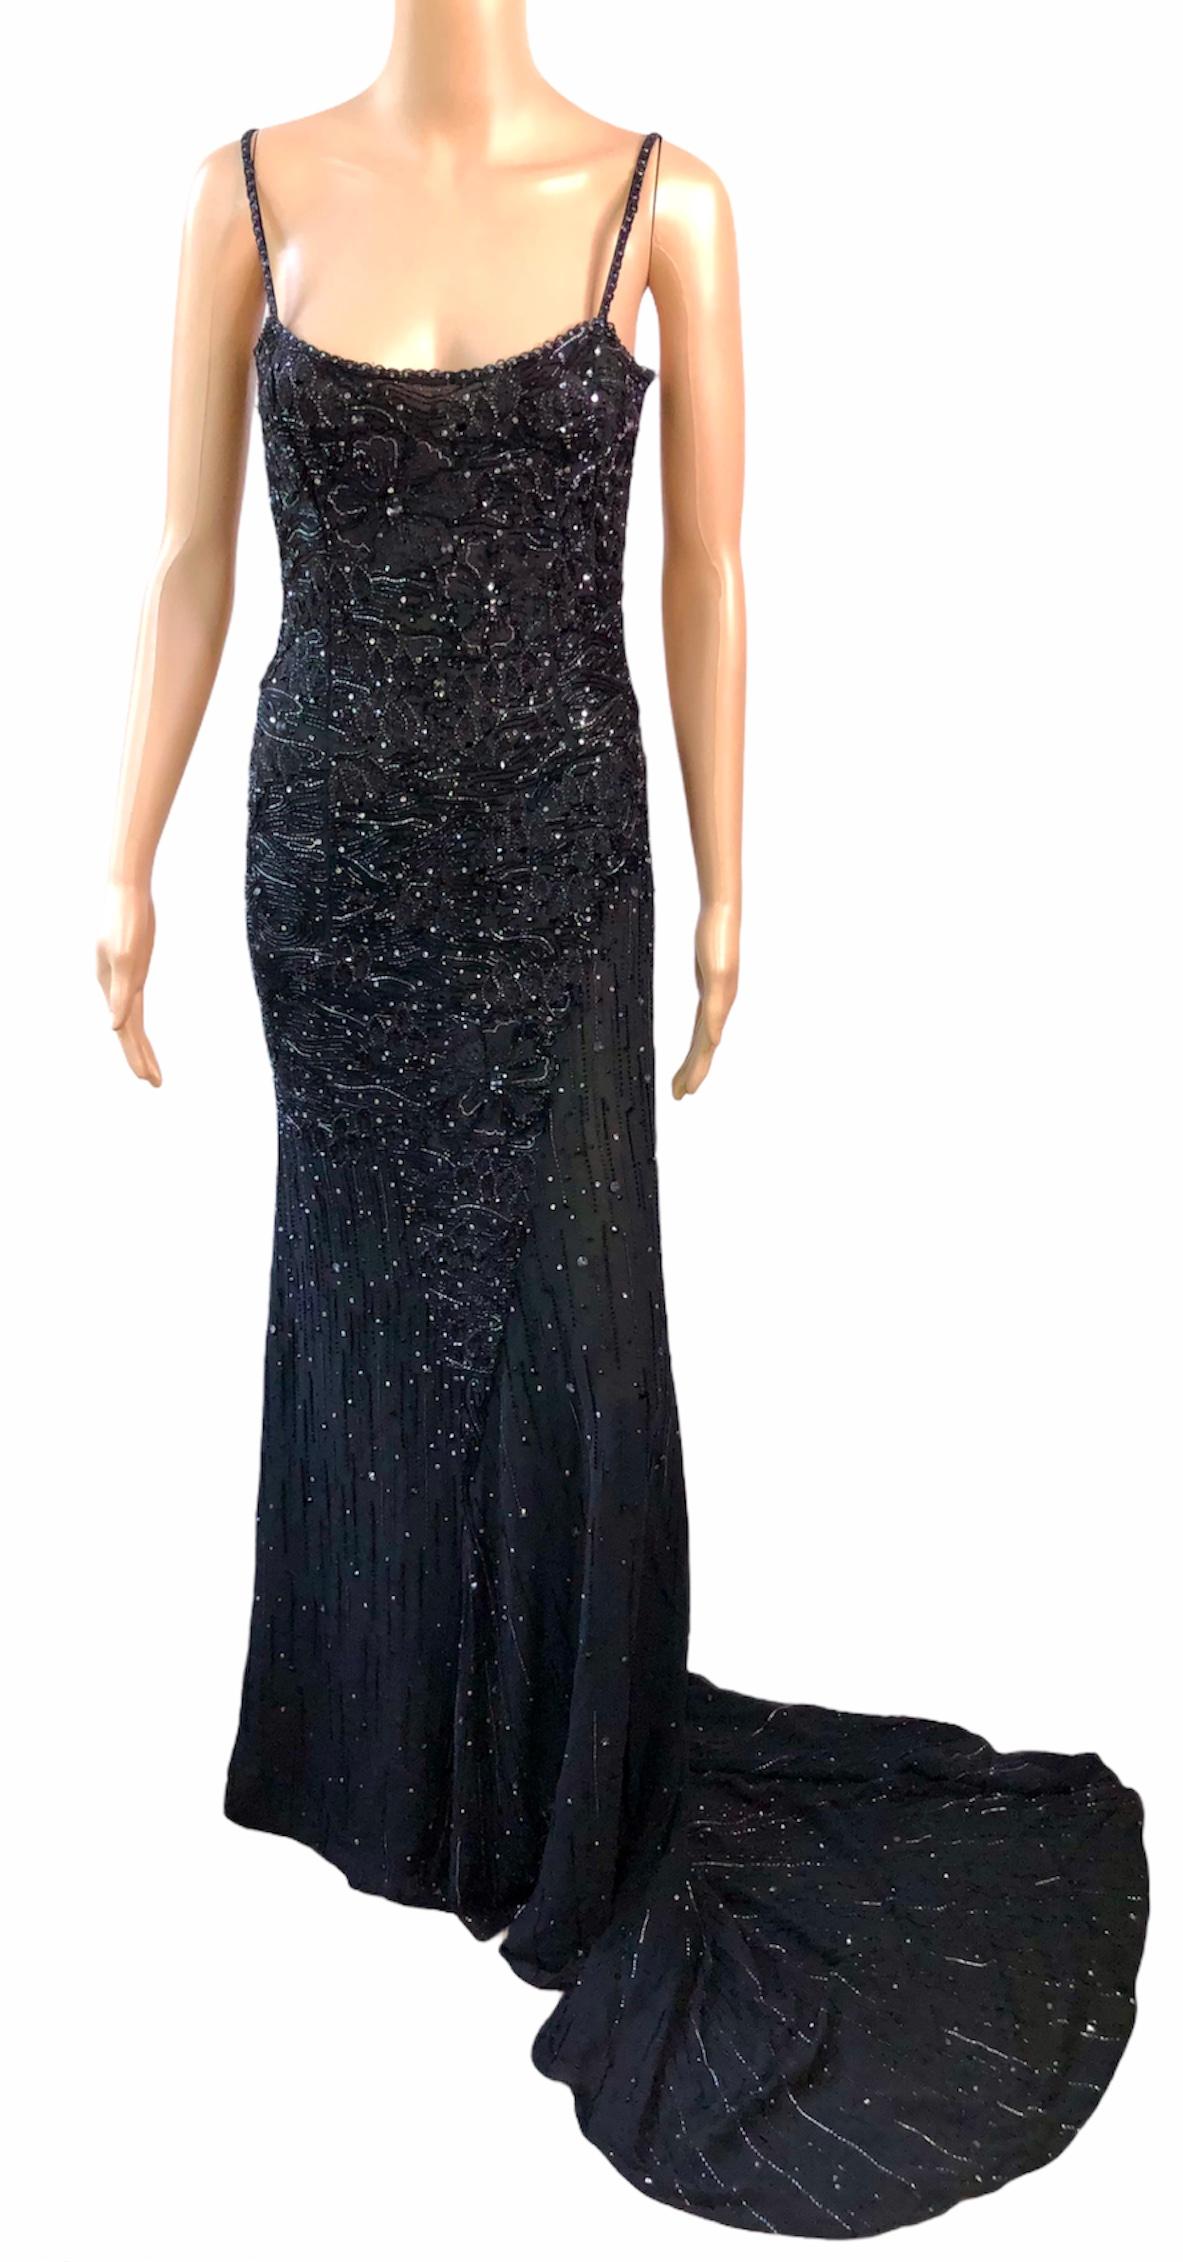 Atelier Versace Haute Couture F/W 1998 Crystal Embellished Cutout Train Gown For Sale 3